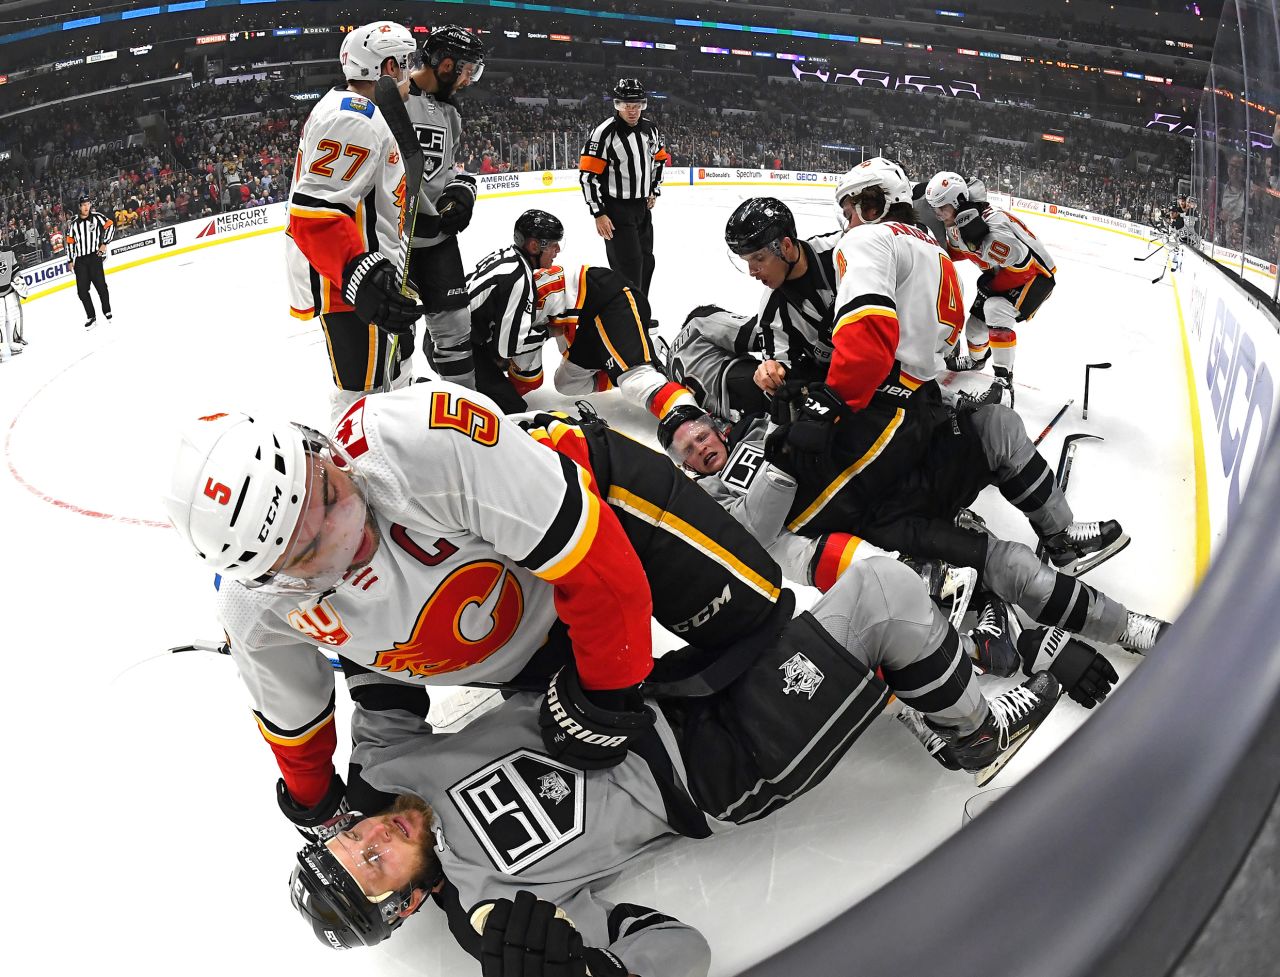 Players from the Calgary Flames and Los Angeles Kings brawl during the third period of their game at Staples Center in Los Angeles, California, on October 19.